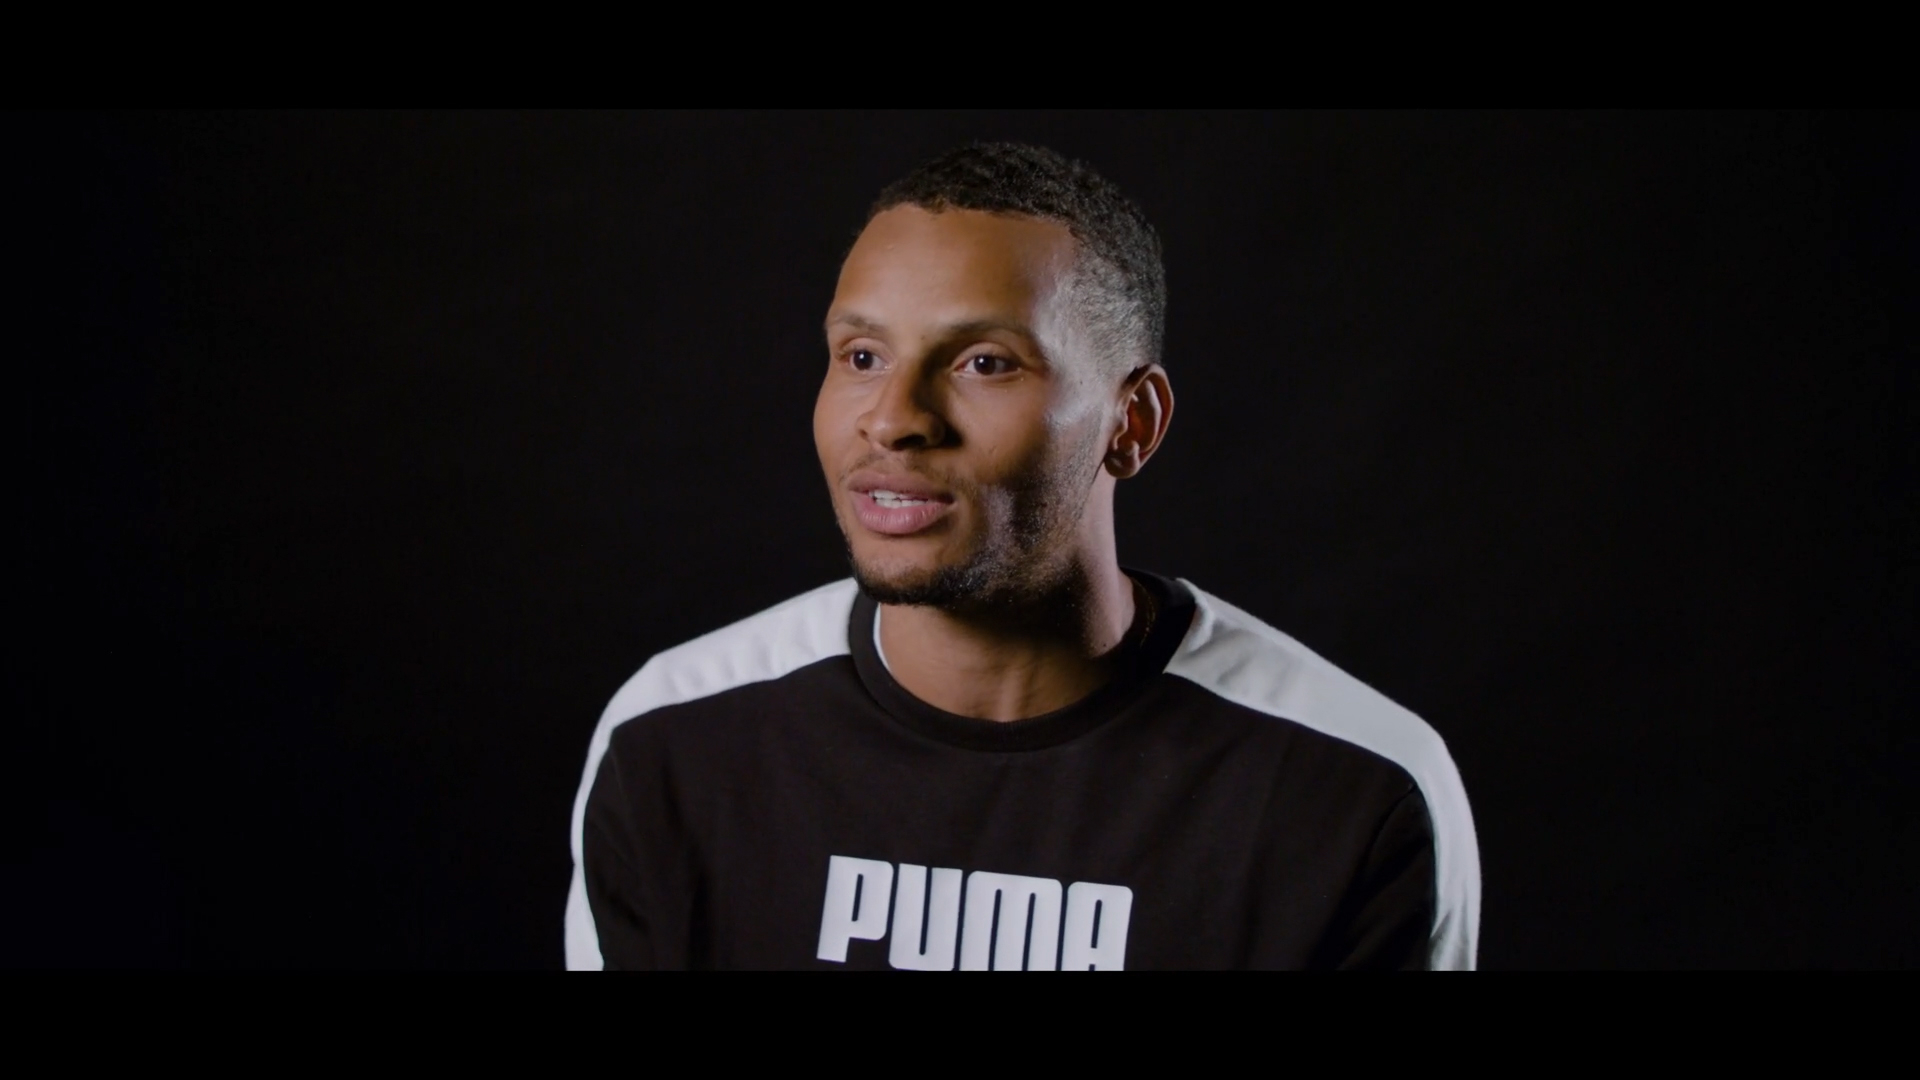 PUMA Ambassador and Canadian sprinter Andre De Grasse shares his motivation and goals in PUMA’s “Only See Great” campaign